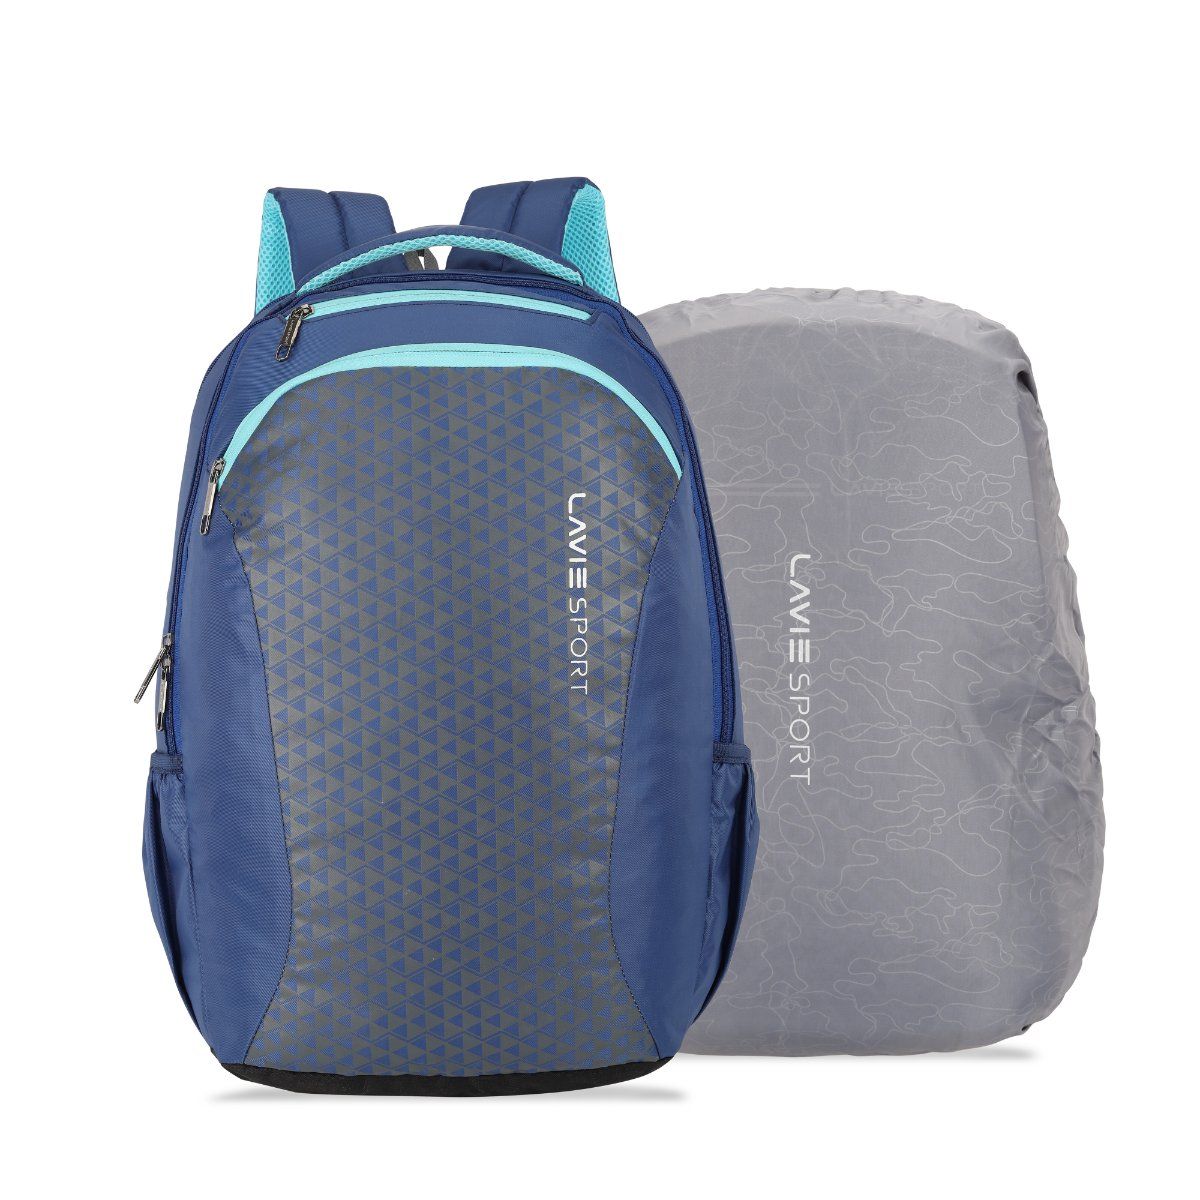 Made in India | Attractive Lavie Sport School/College Laptop Backpack